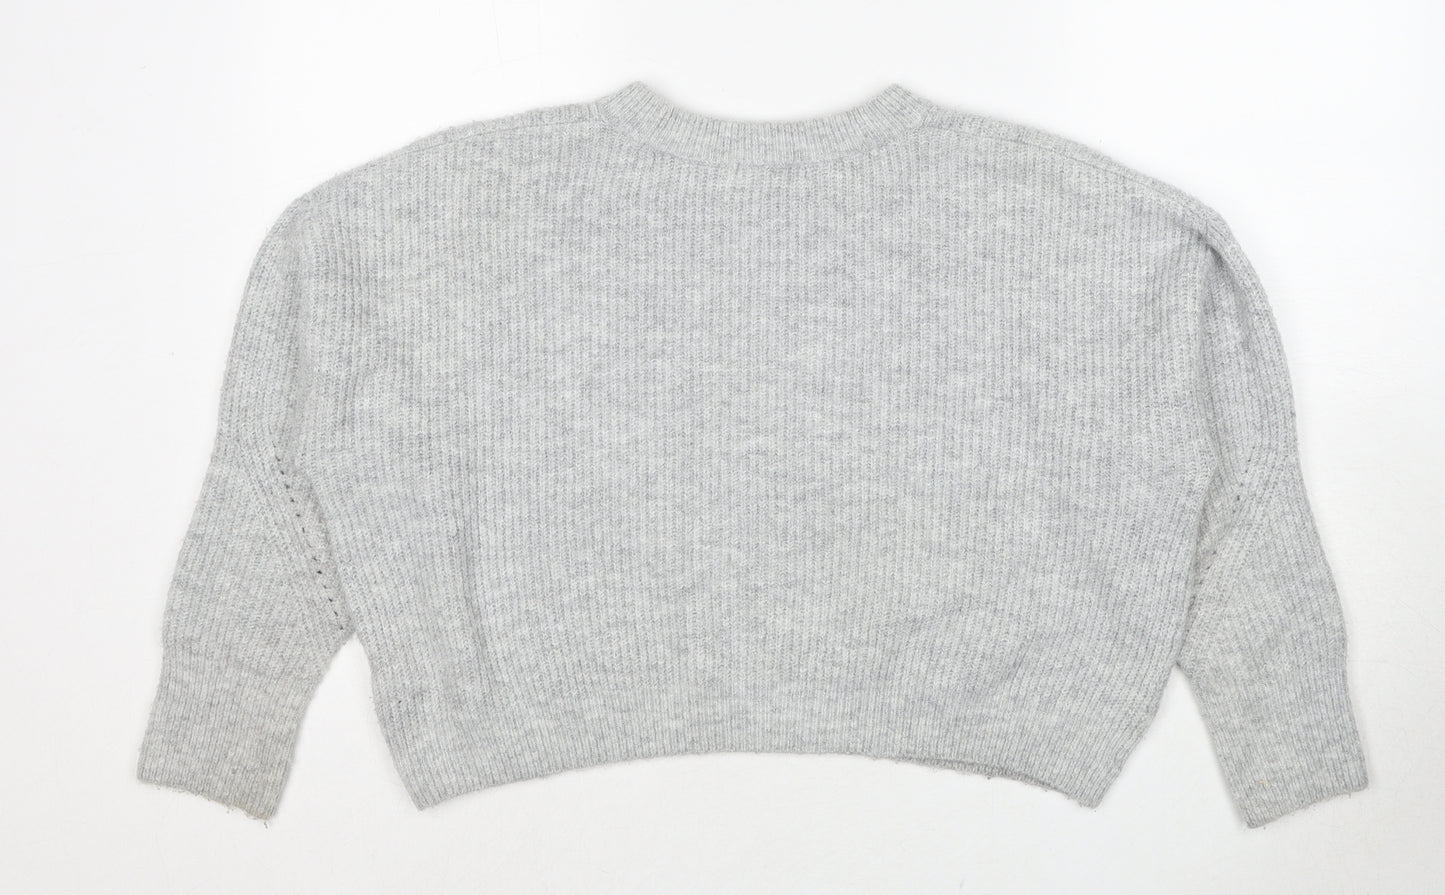 Topshop Womens Grey Round Neck Acrylic Pullover Jumper Size S